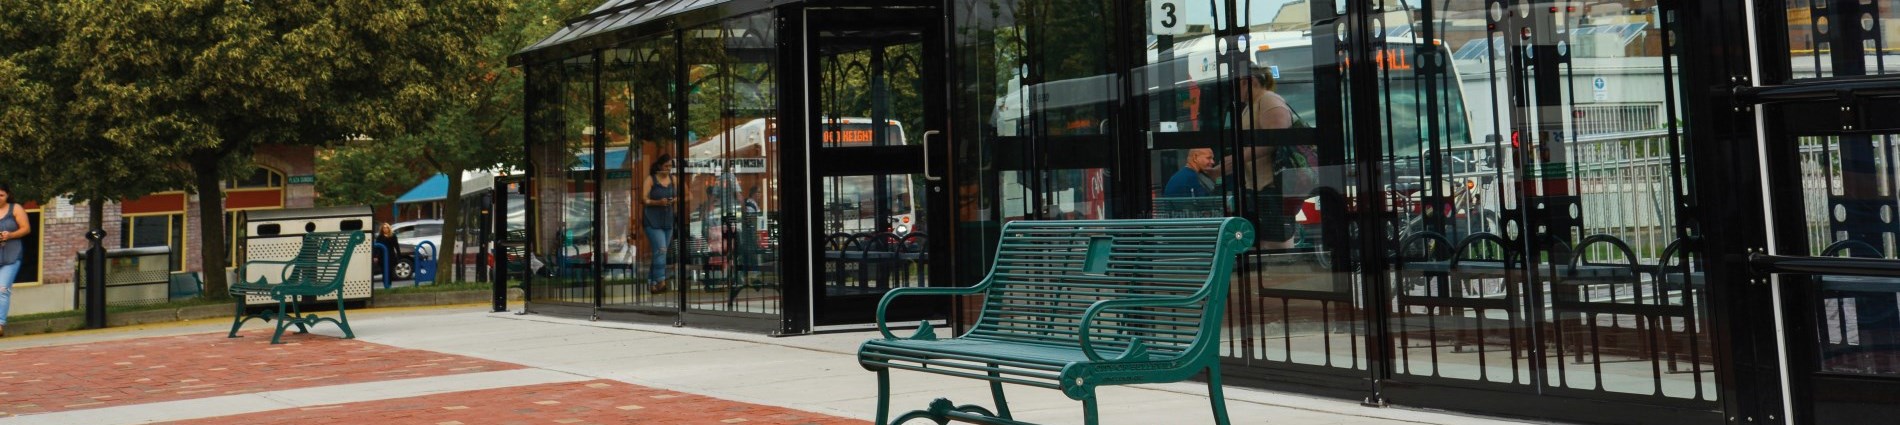 Cropped photo of transit terminal with benches